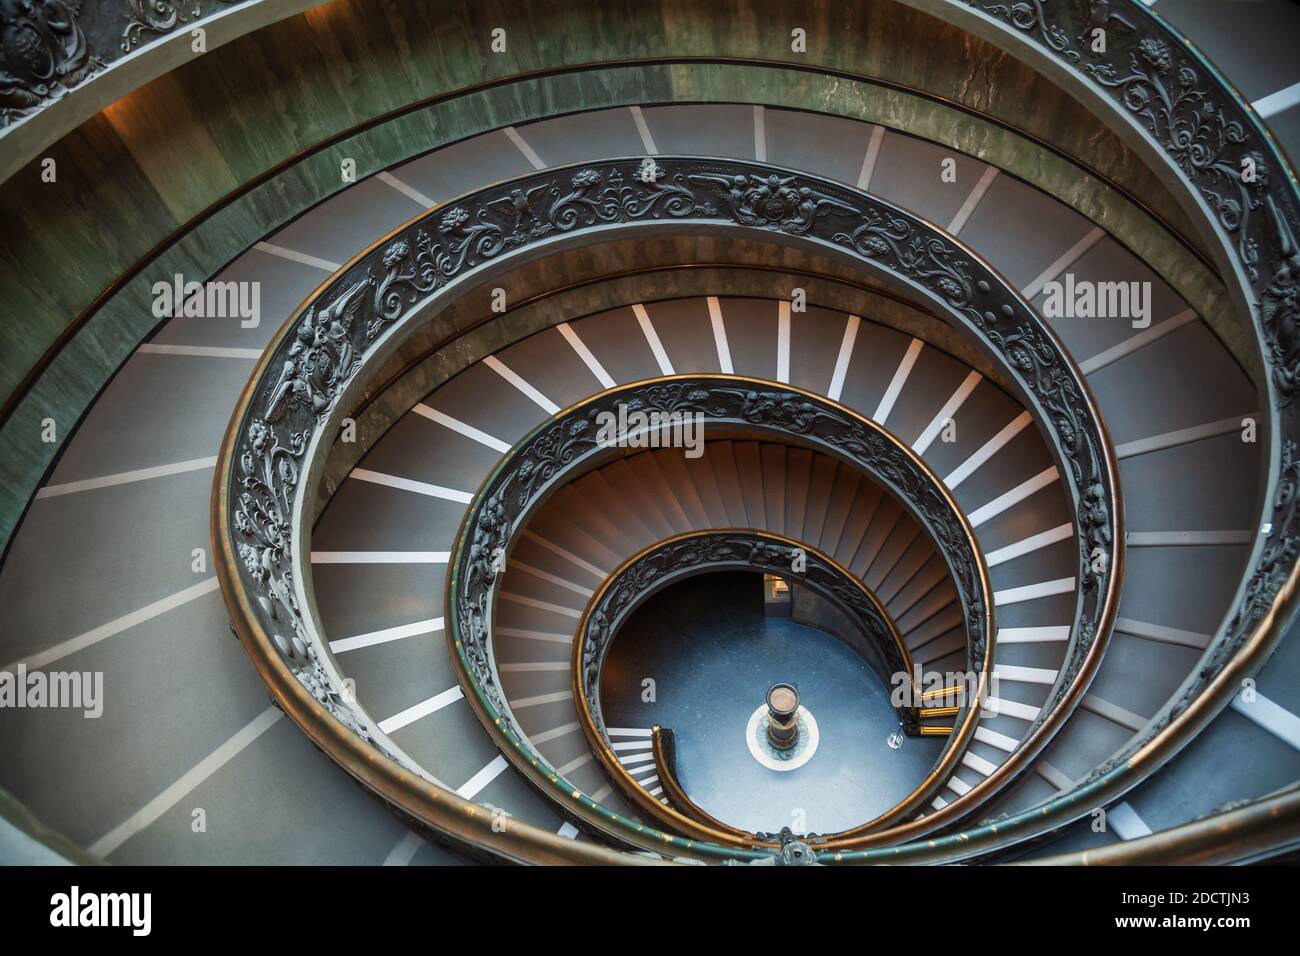 Spiral stairs of double helix staircase (Bramante Staircase) in the Vatican Museums, Rome, Italy Stock Photo